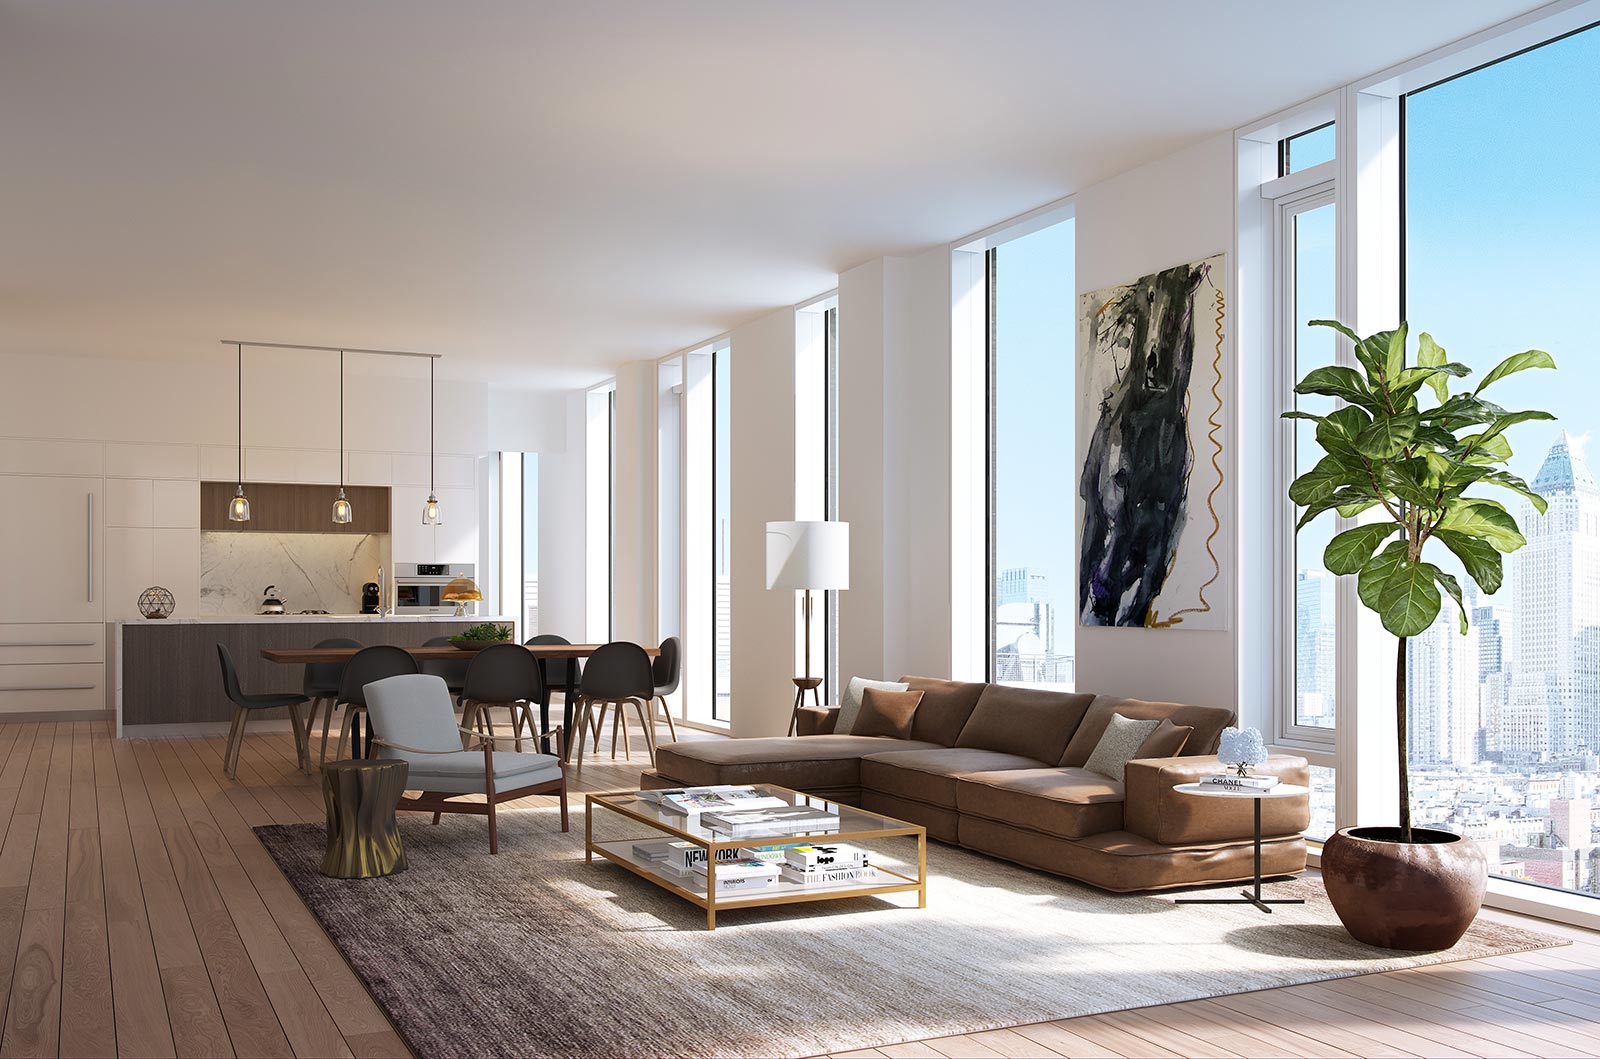 505 W 43 open-plan living room with floor-to-ceiling windows